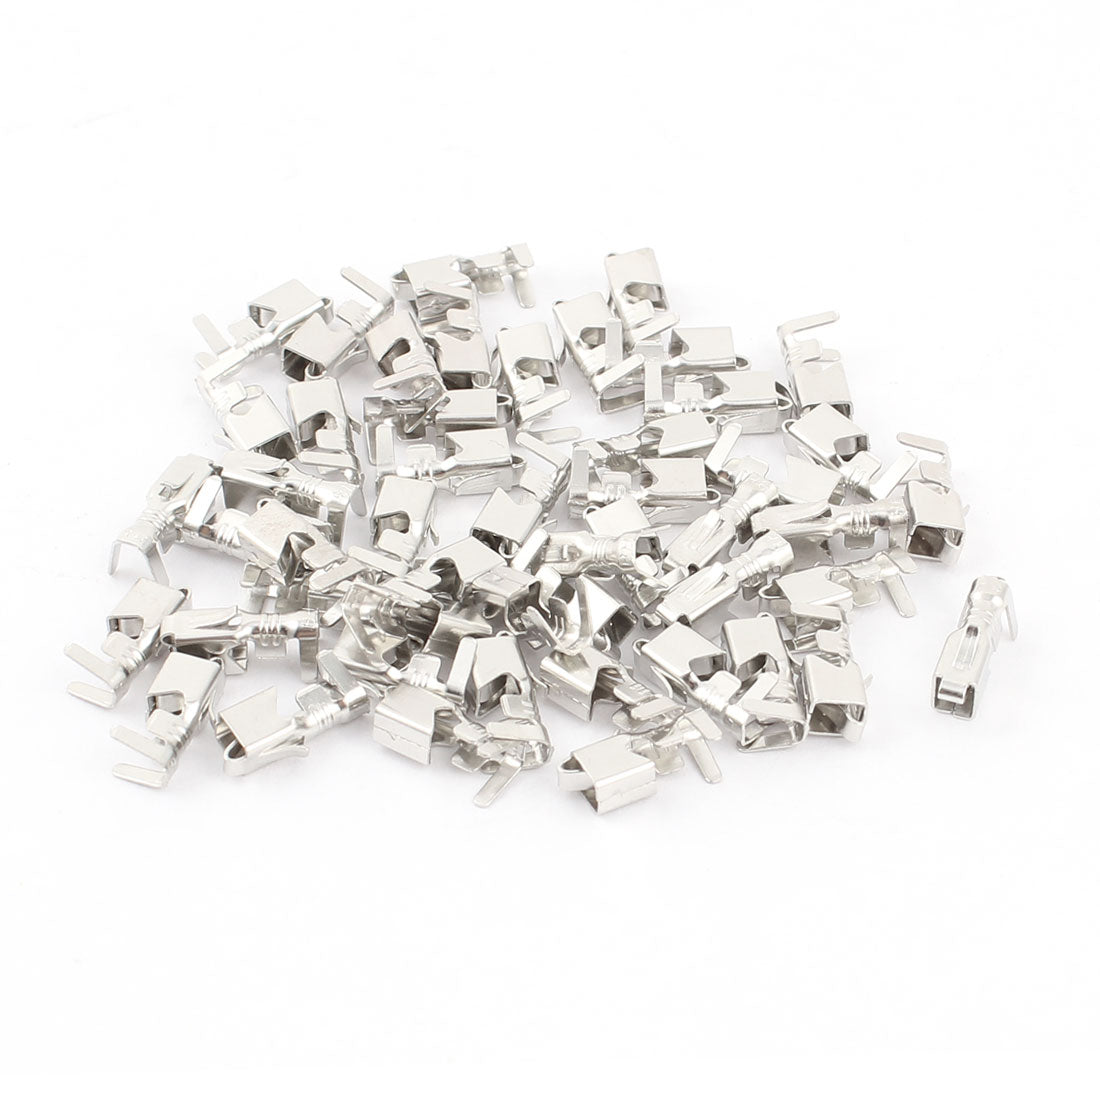 Uxcell Uxcell 50 pcs VH 3.96mm Connector Crimp Contact Pin Copper-Tin